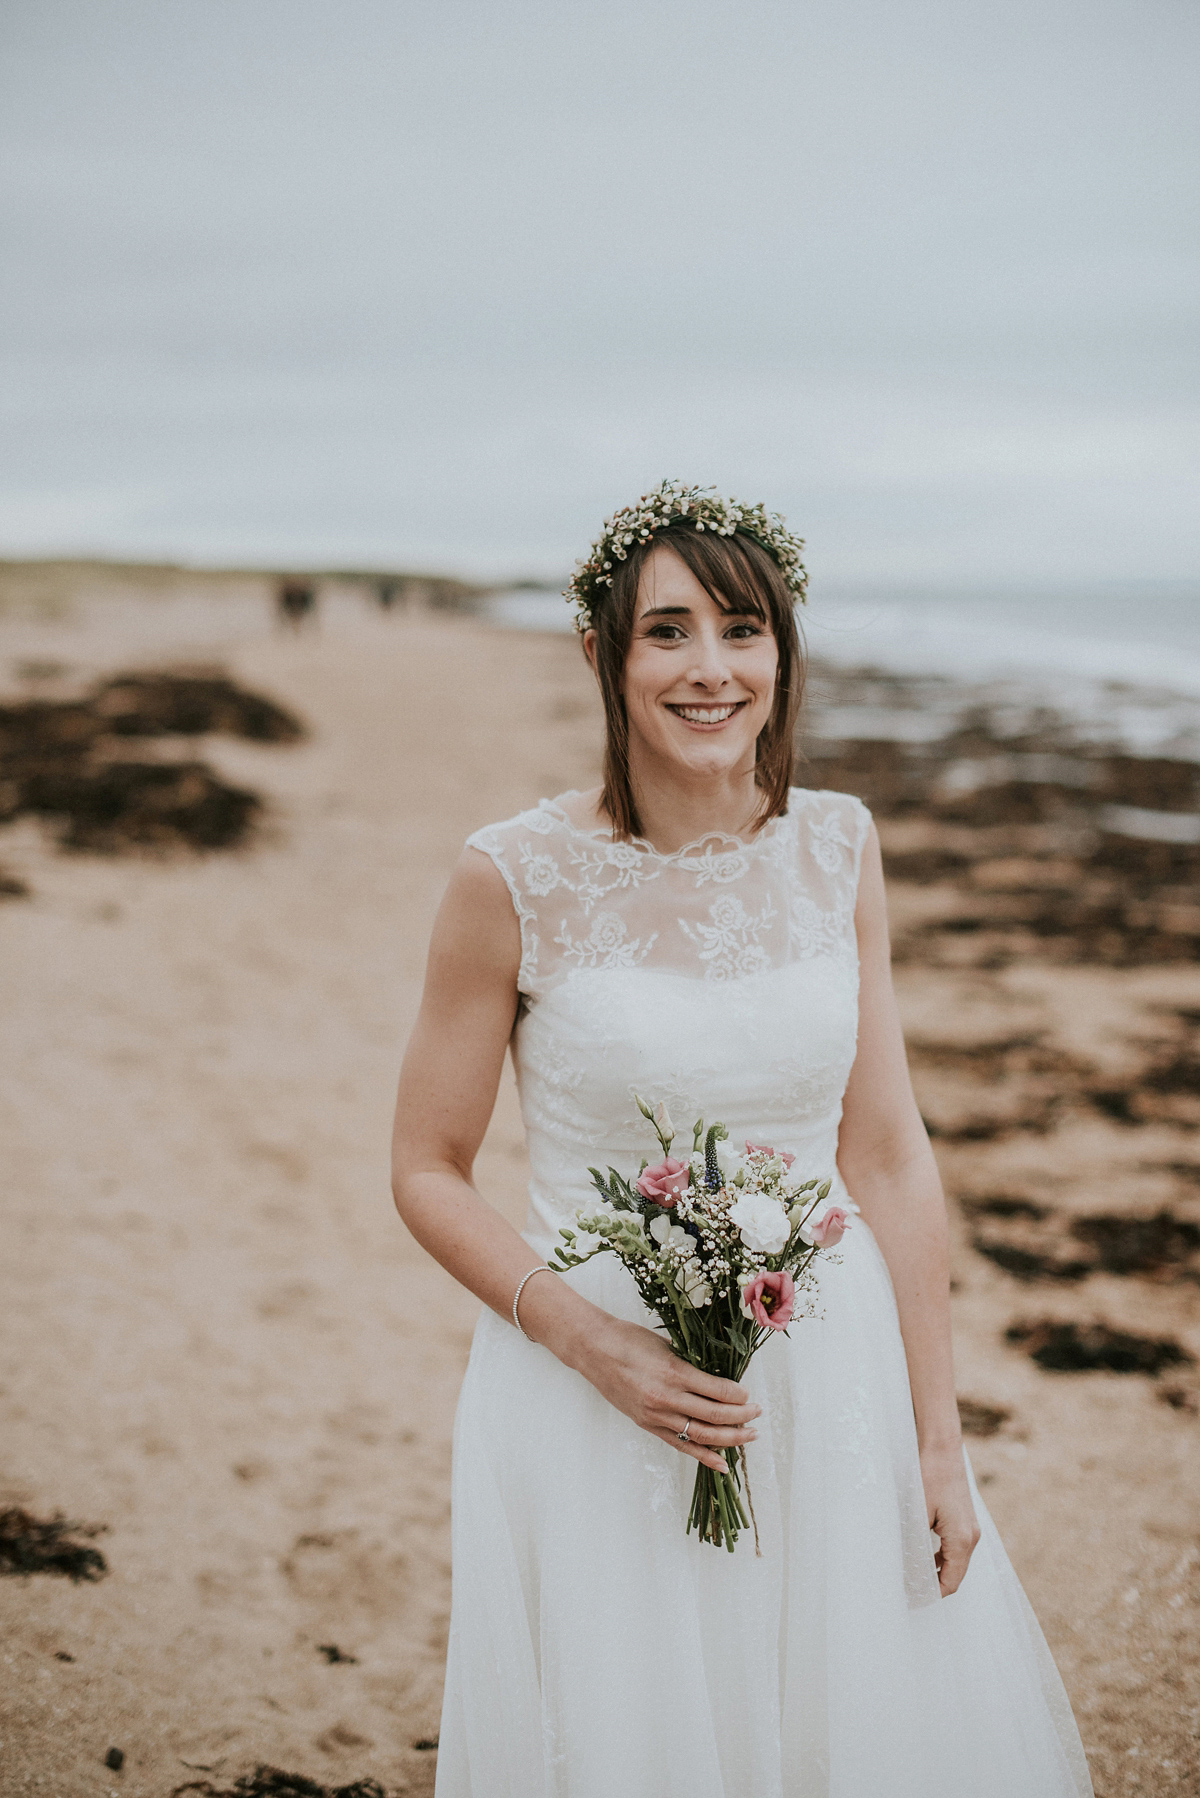 lovely wedding by the sea 27 1